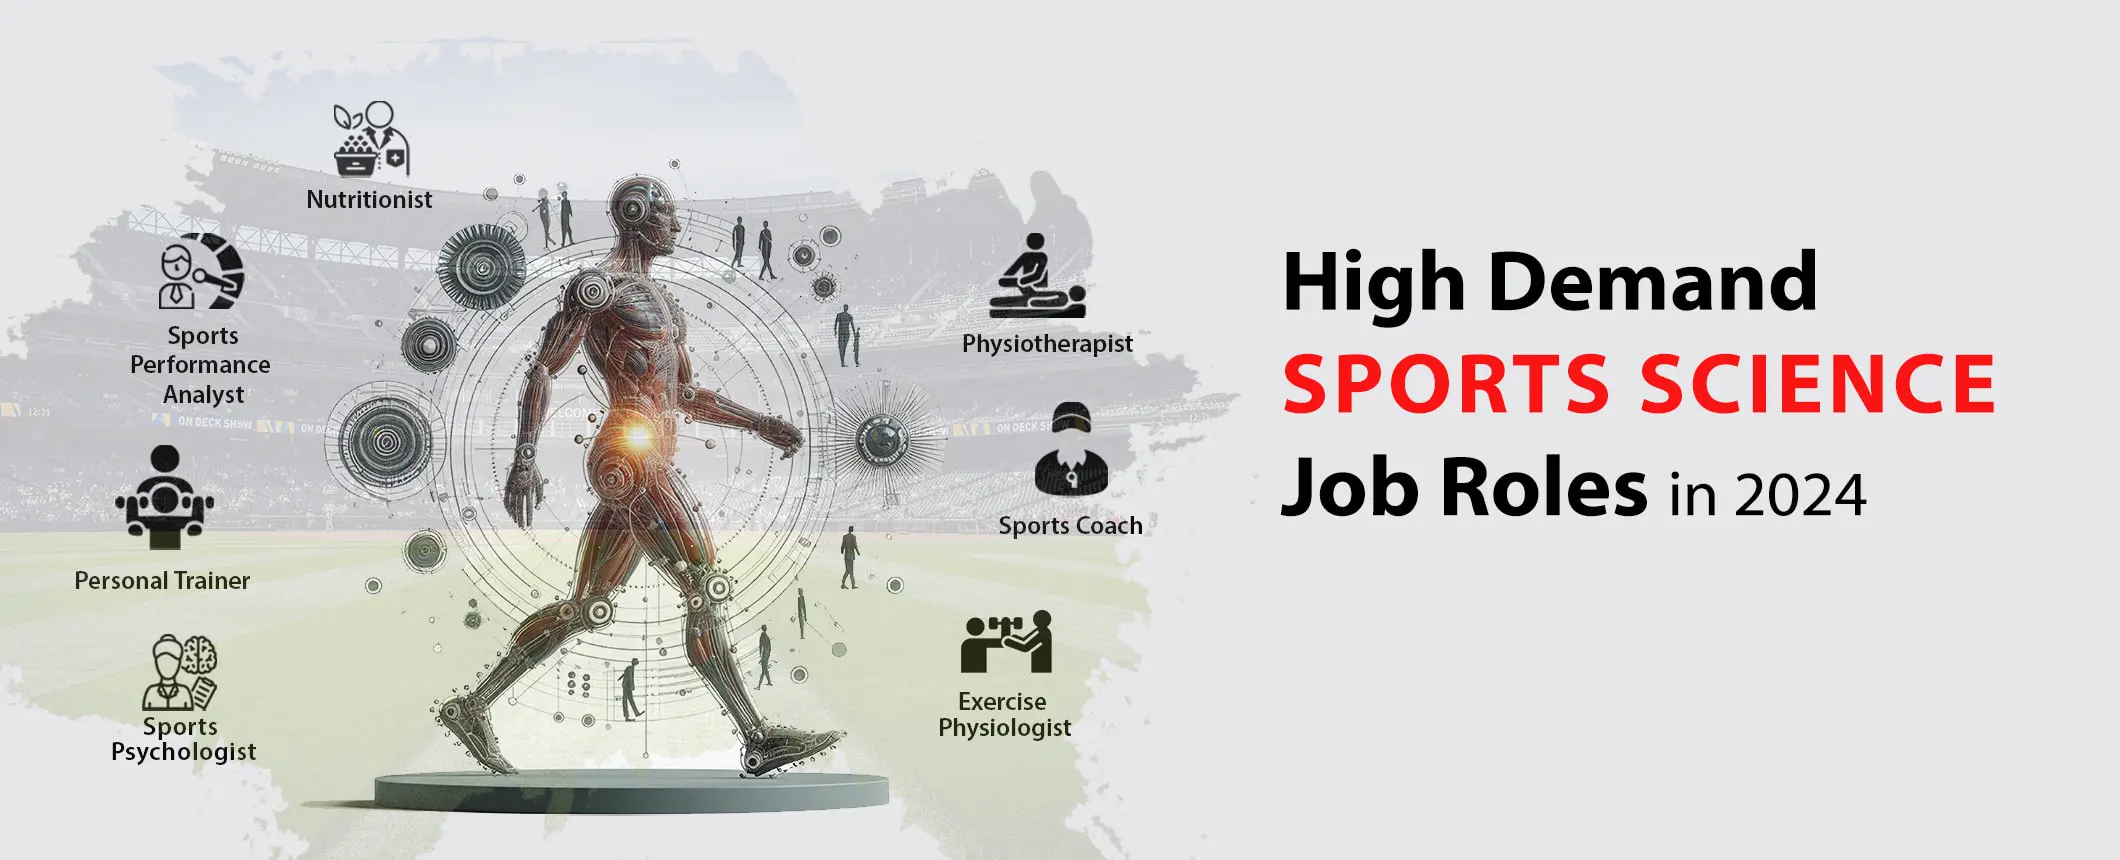 High Demand of Sports Science Job Roles in India